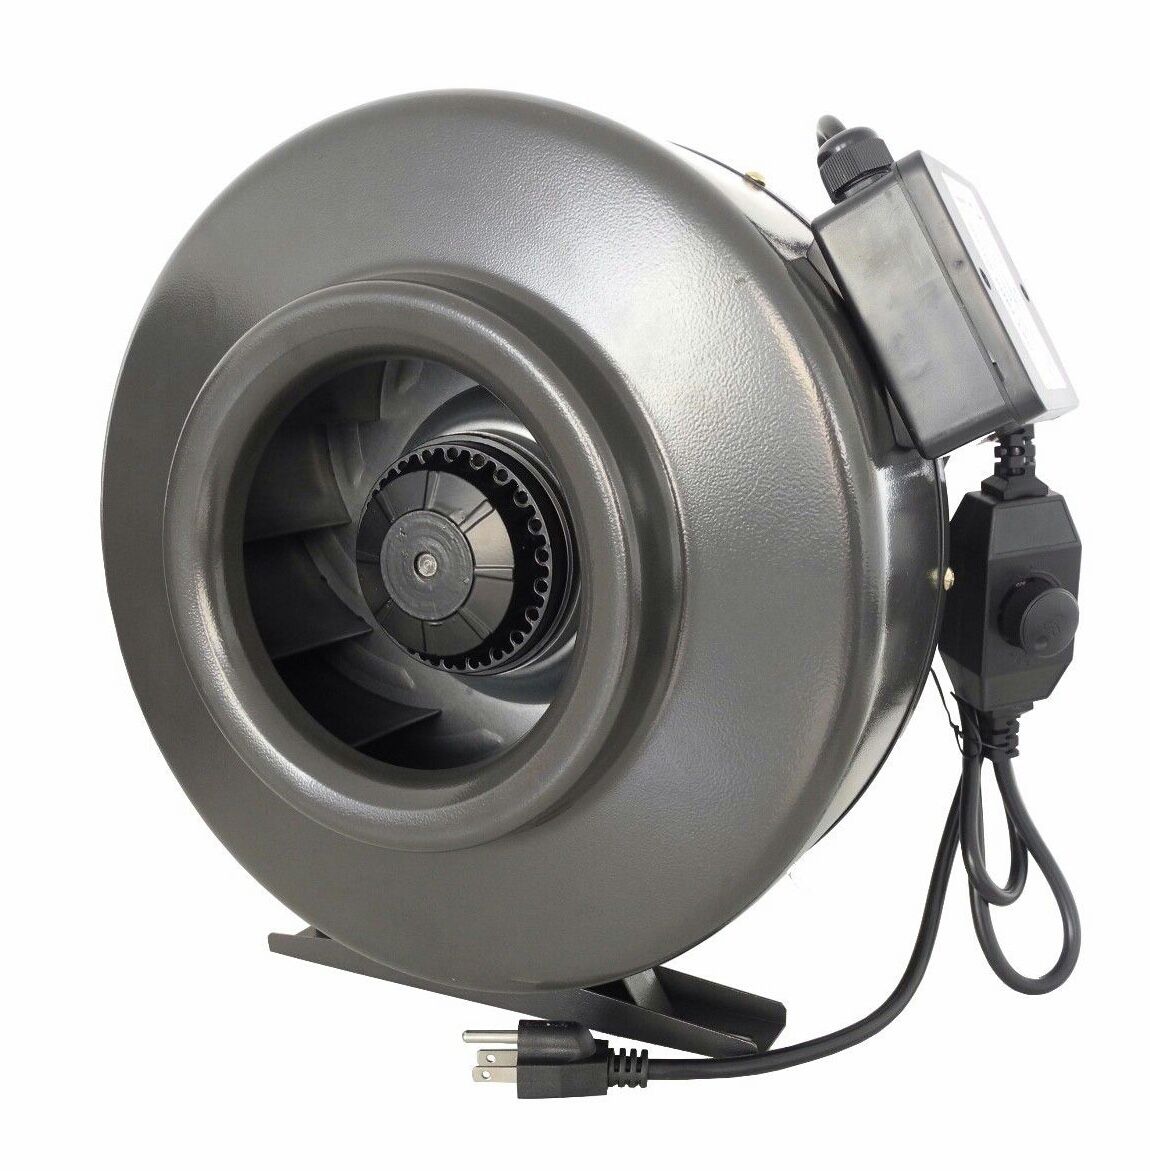 6” fan and filter combo, brand new in box. Adjustable speed in-line 400 cfm, with or without new carbon filter